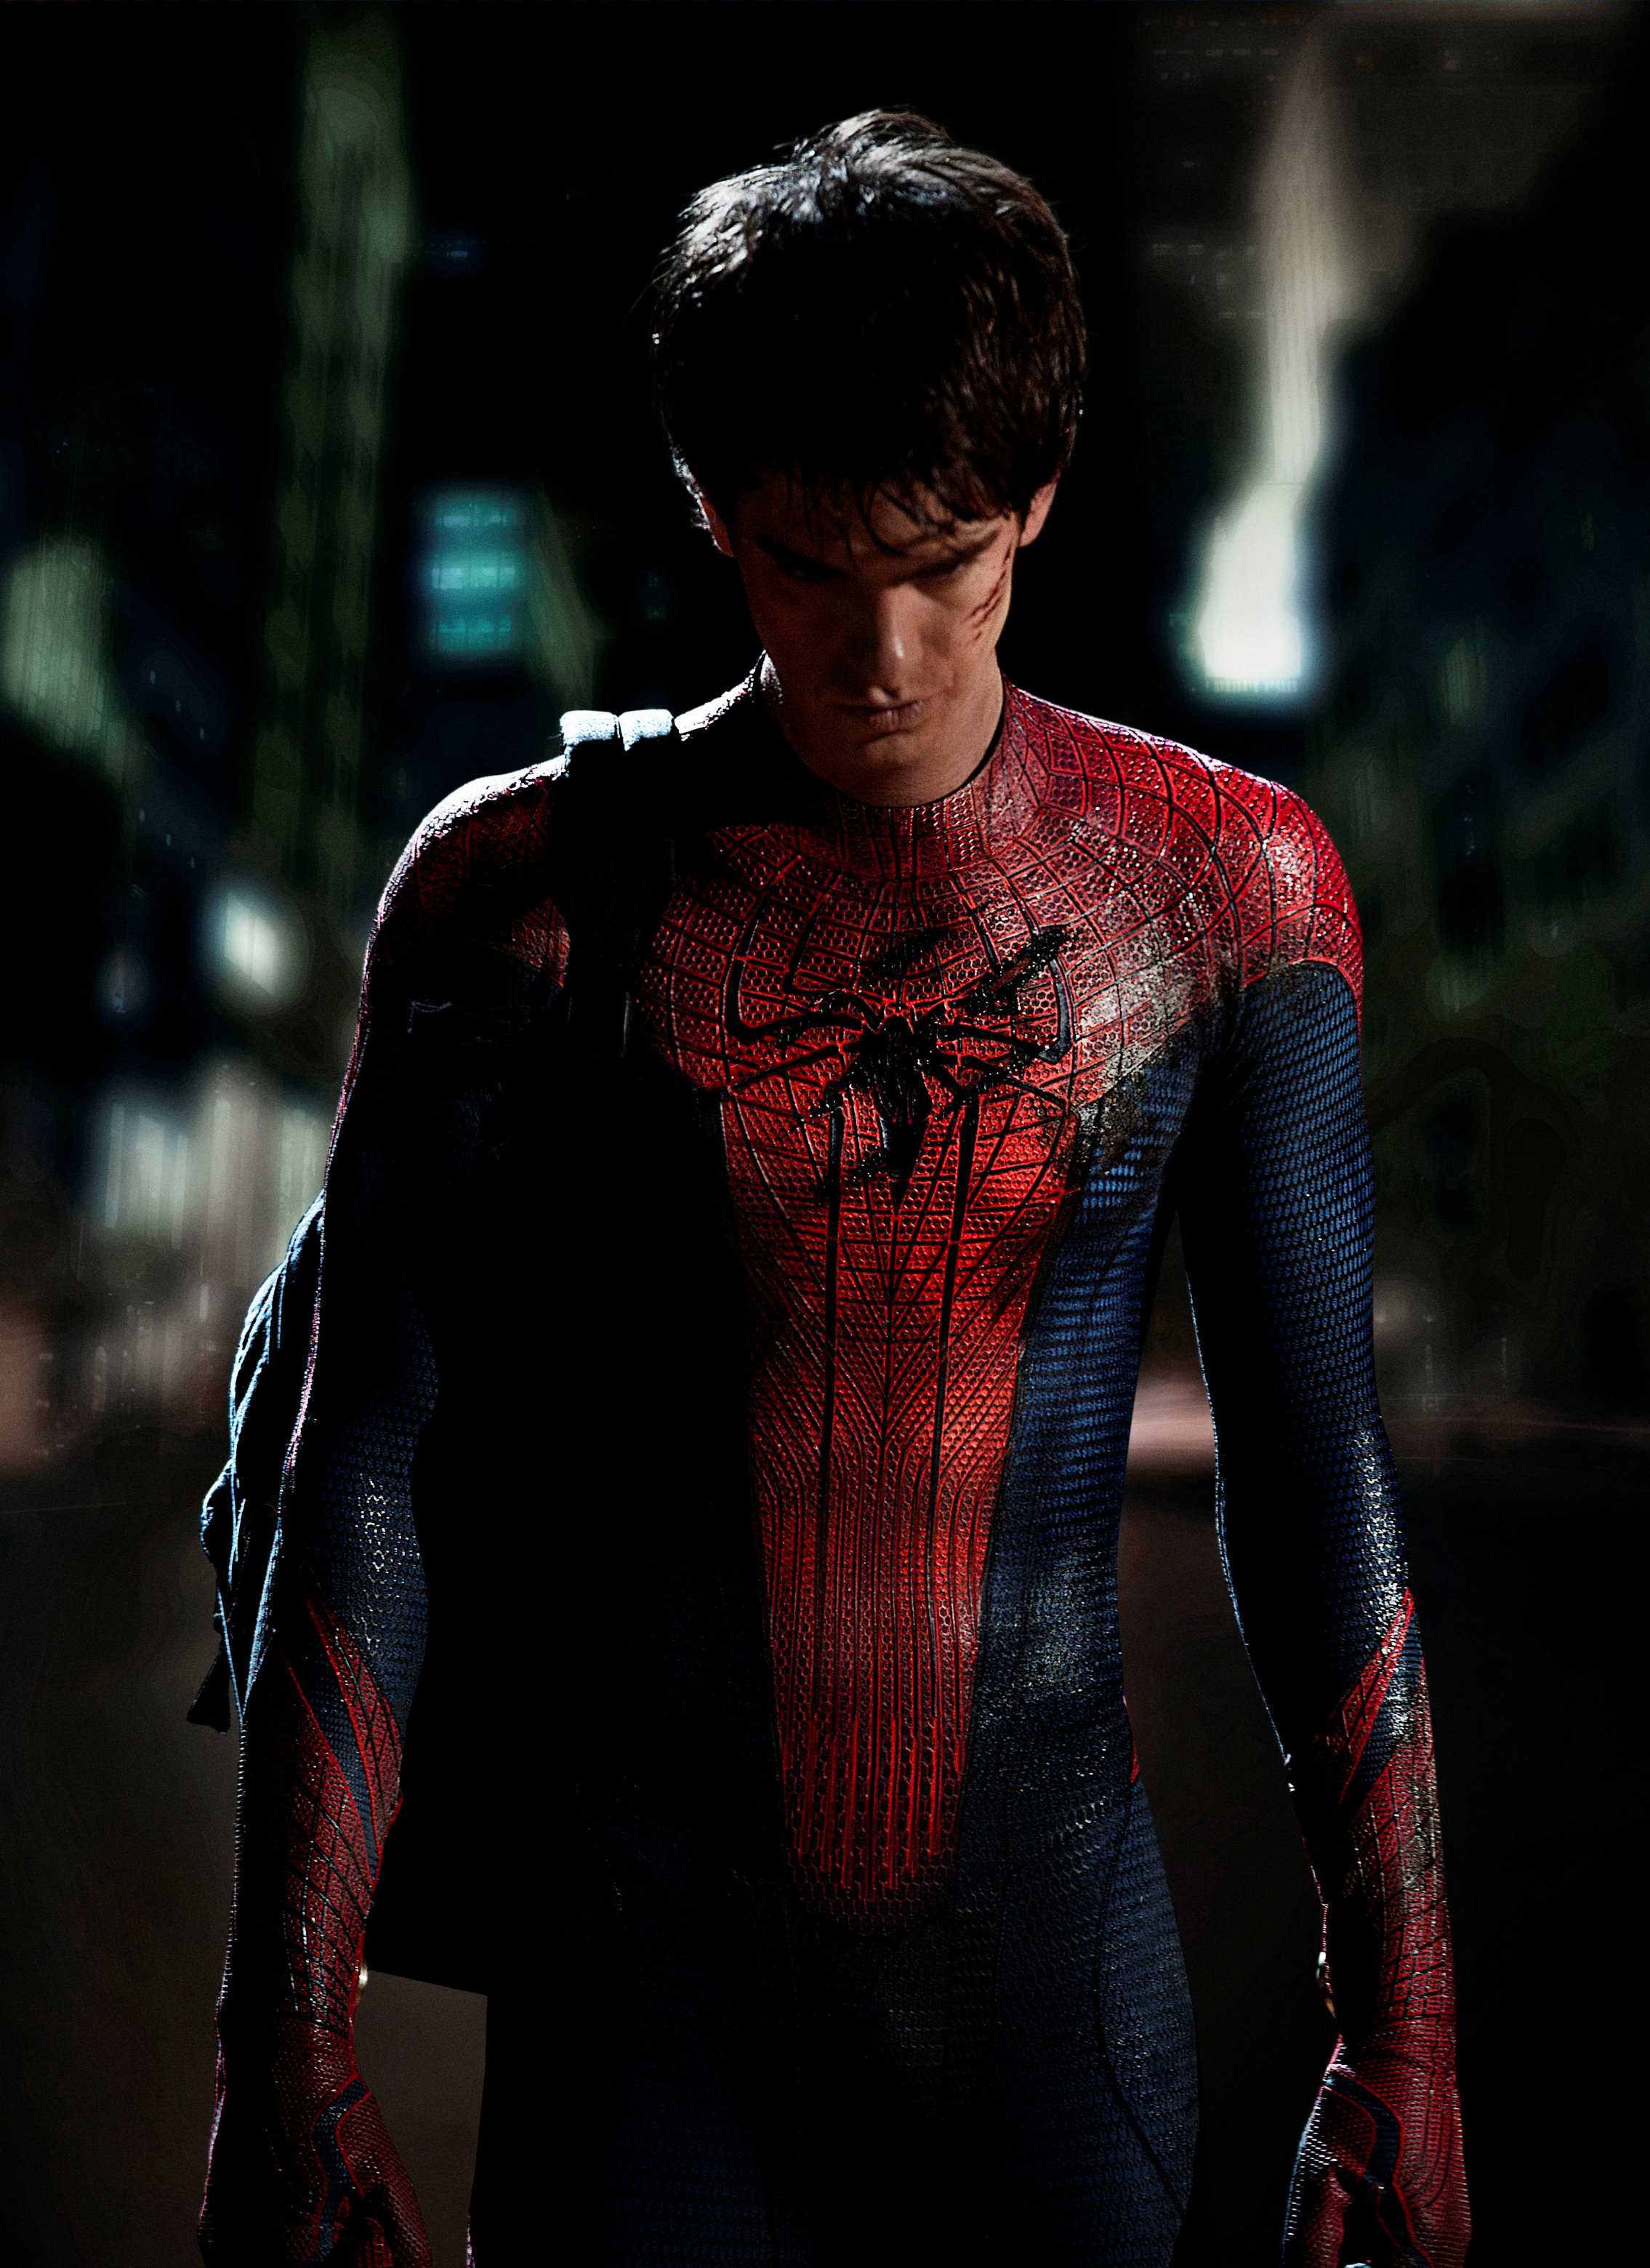  Andrew Garfield in the first studio-released photo of Spider-Man in costume.